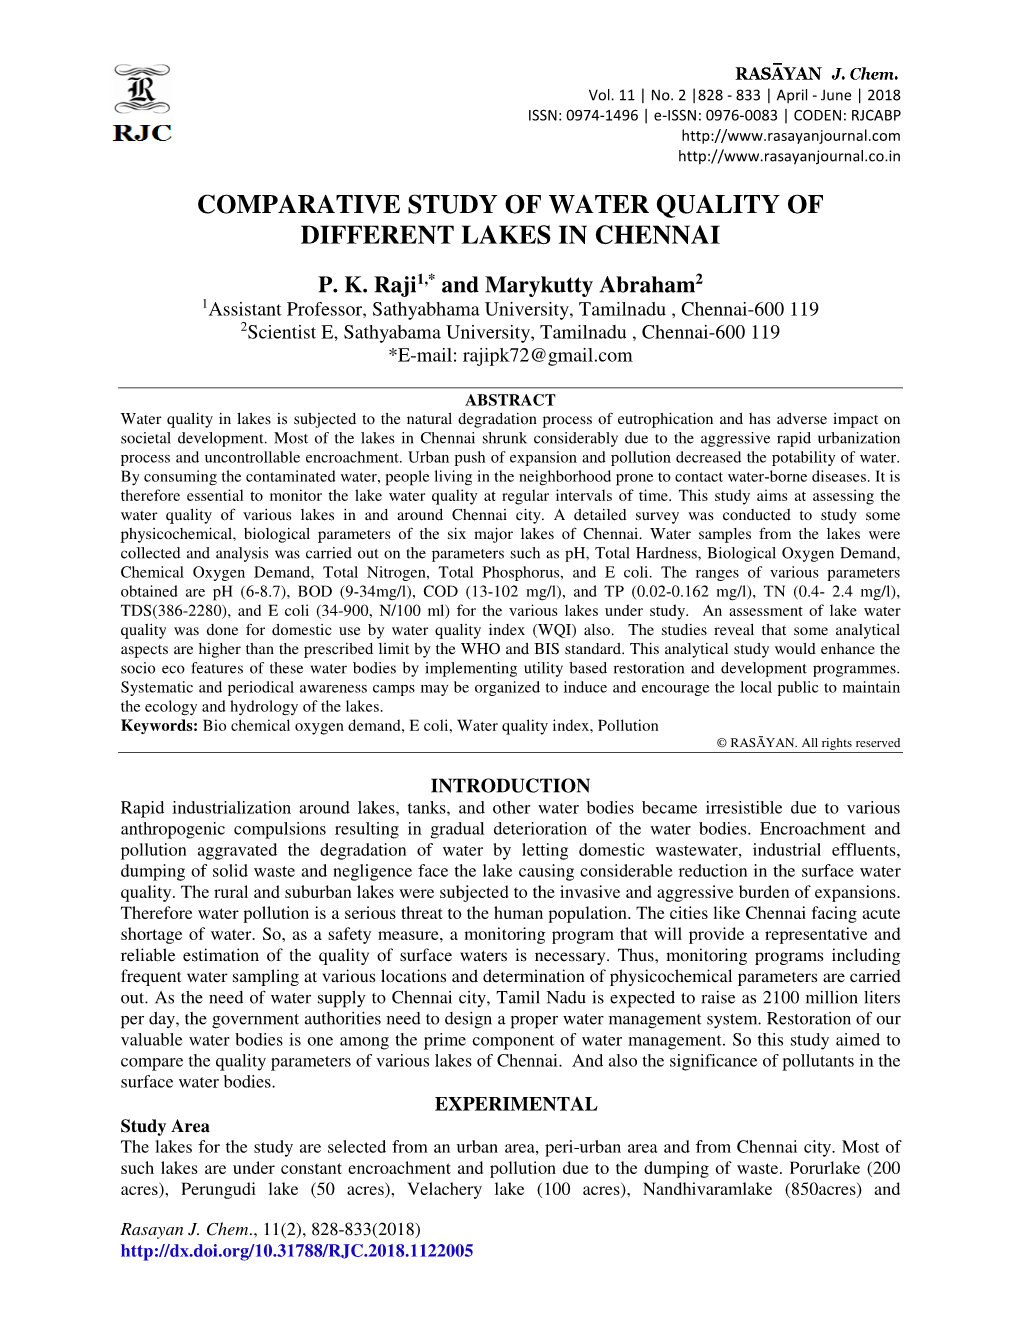 Comparative Study of Water Quality of Different Lakes in Chennai